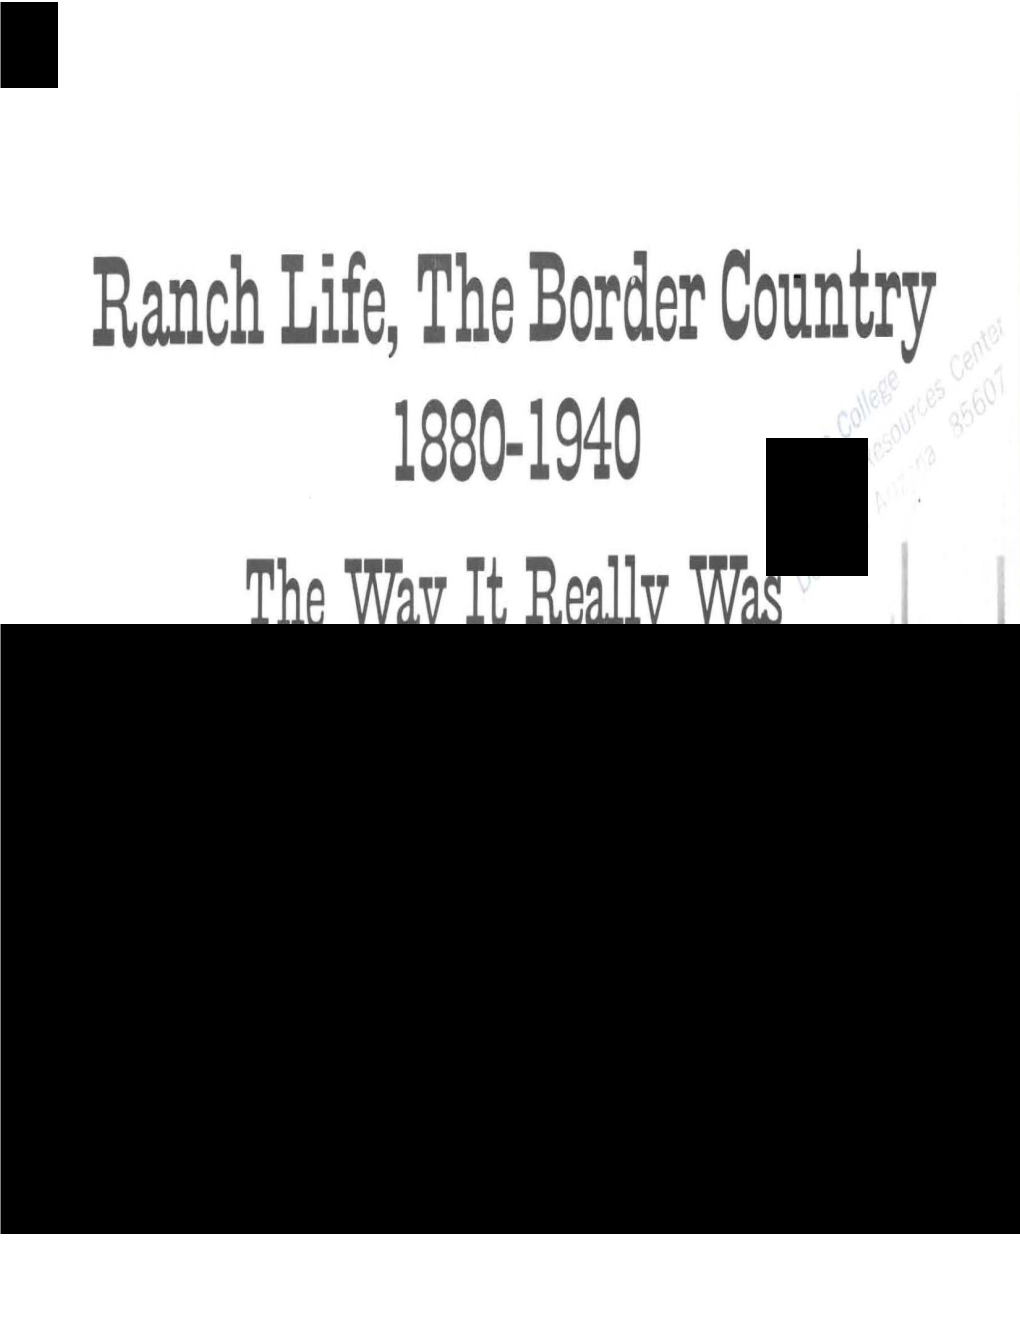 Ranch Life, the Border Country Foreword 1880-1940 the Cowbelles Were Founded October 17, 1939 at a Meeting in the Home of Mrs